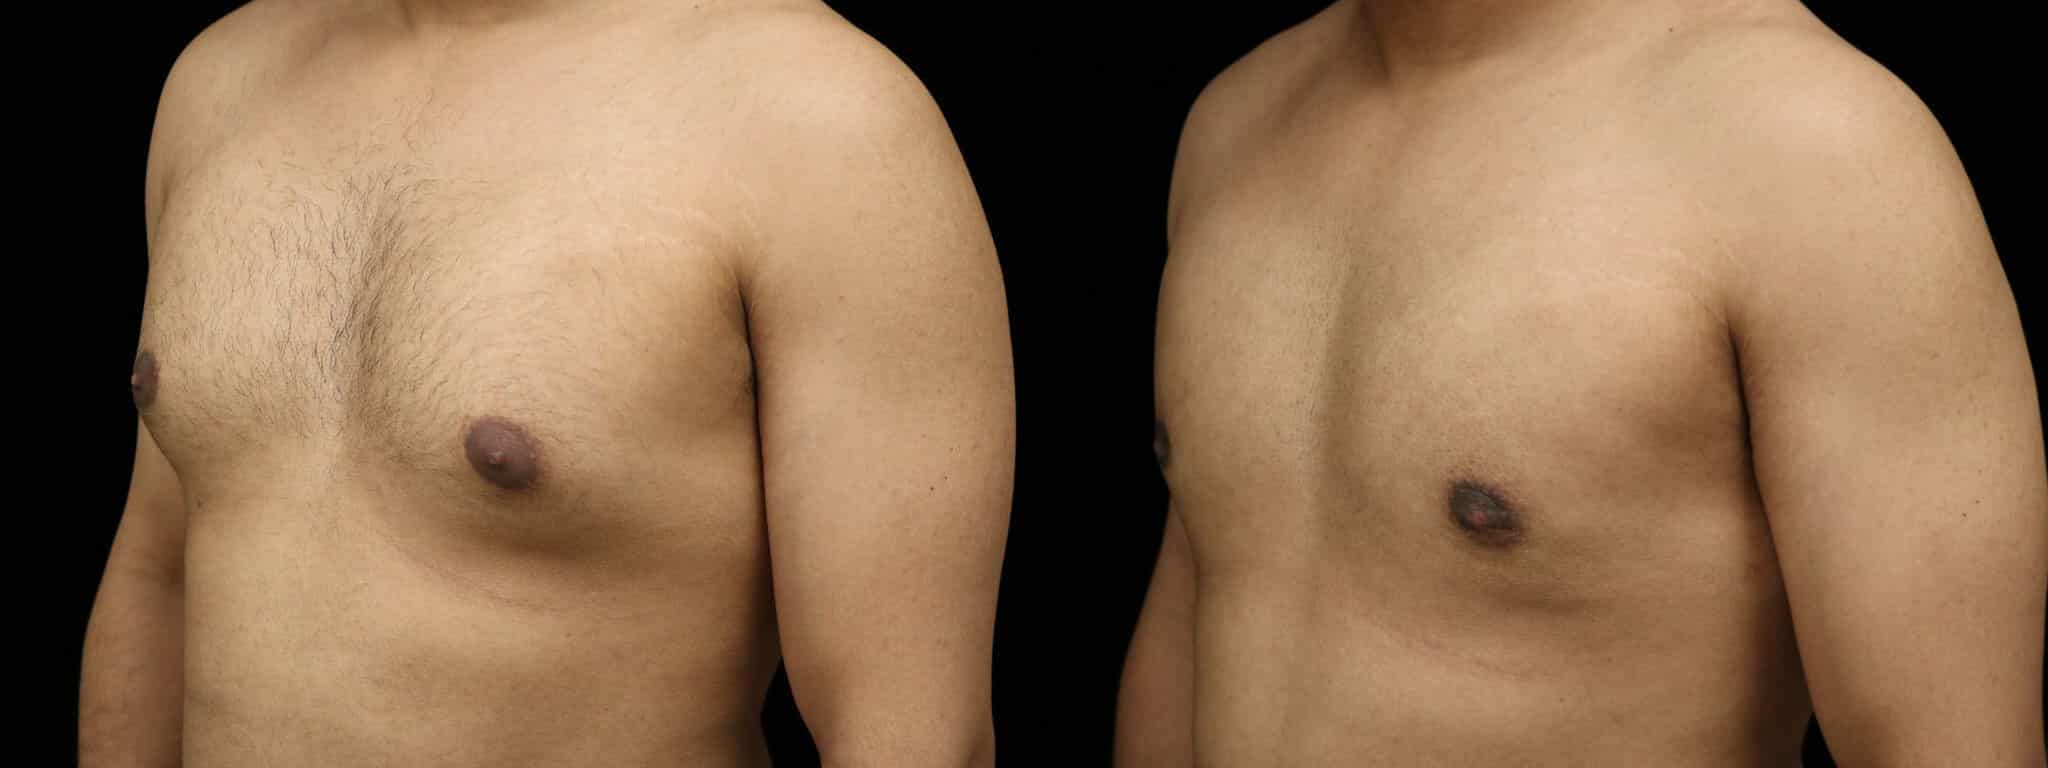 Gynecomastia Patient 20 Before & After Details